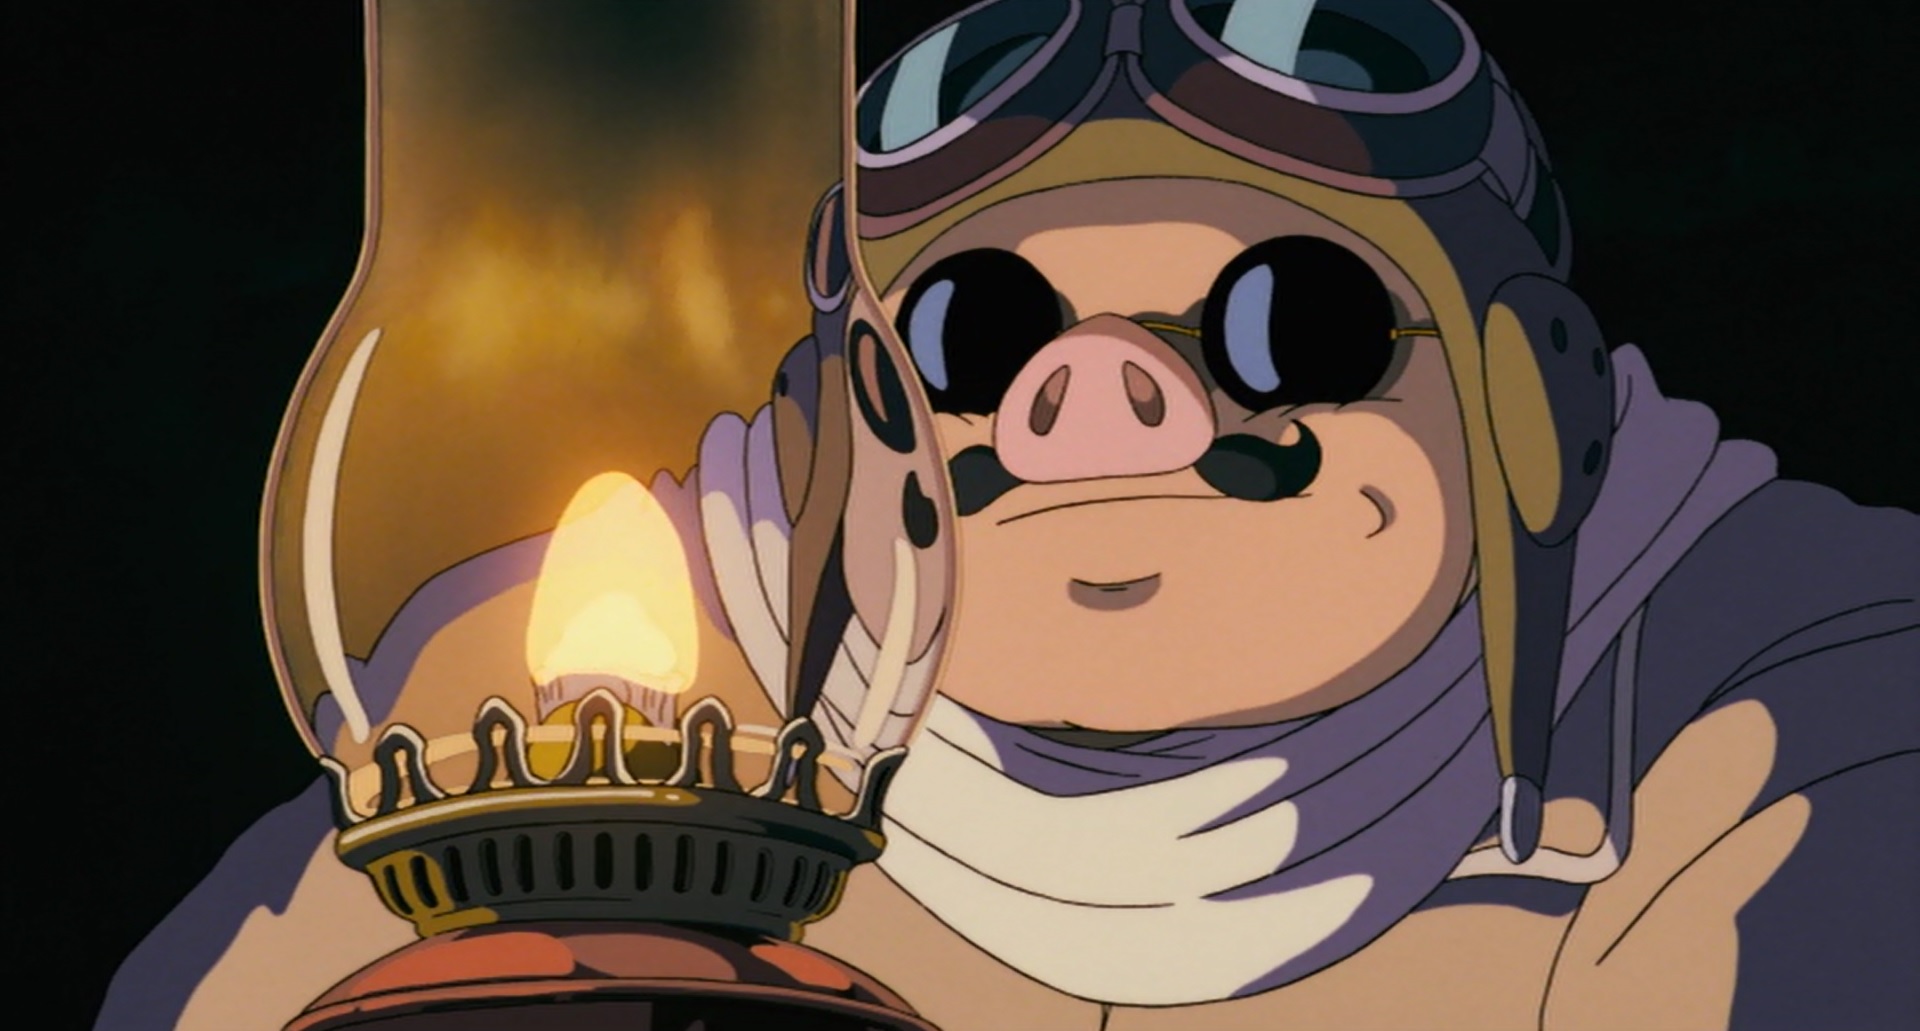 Porco from Porco Rosso staring at an oil lamp.